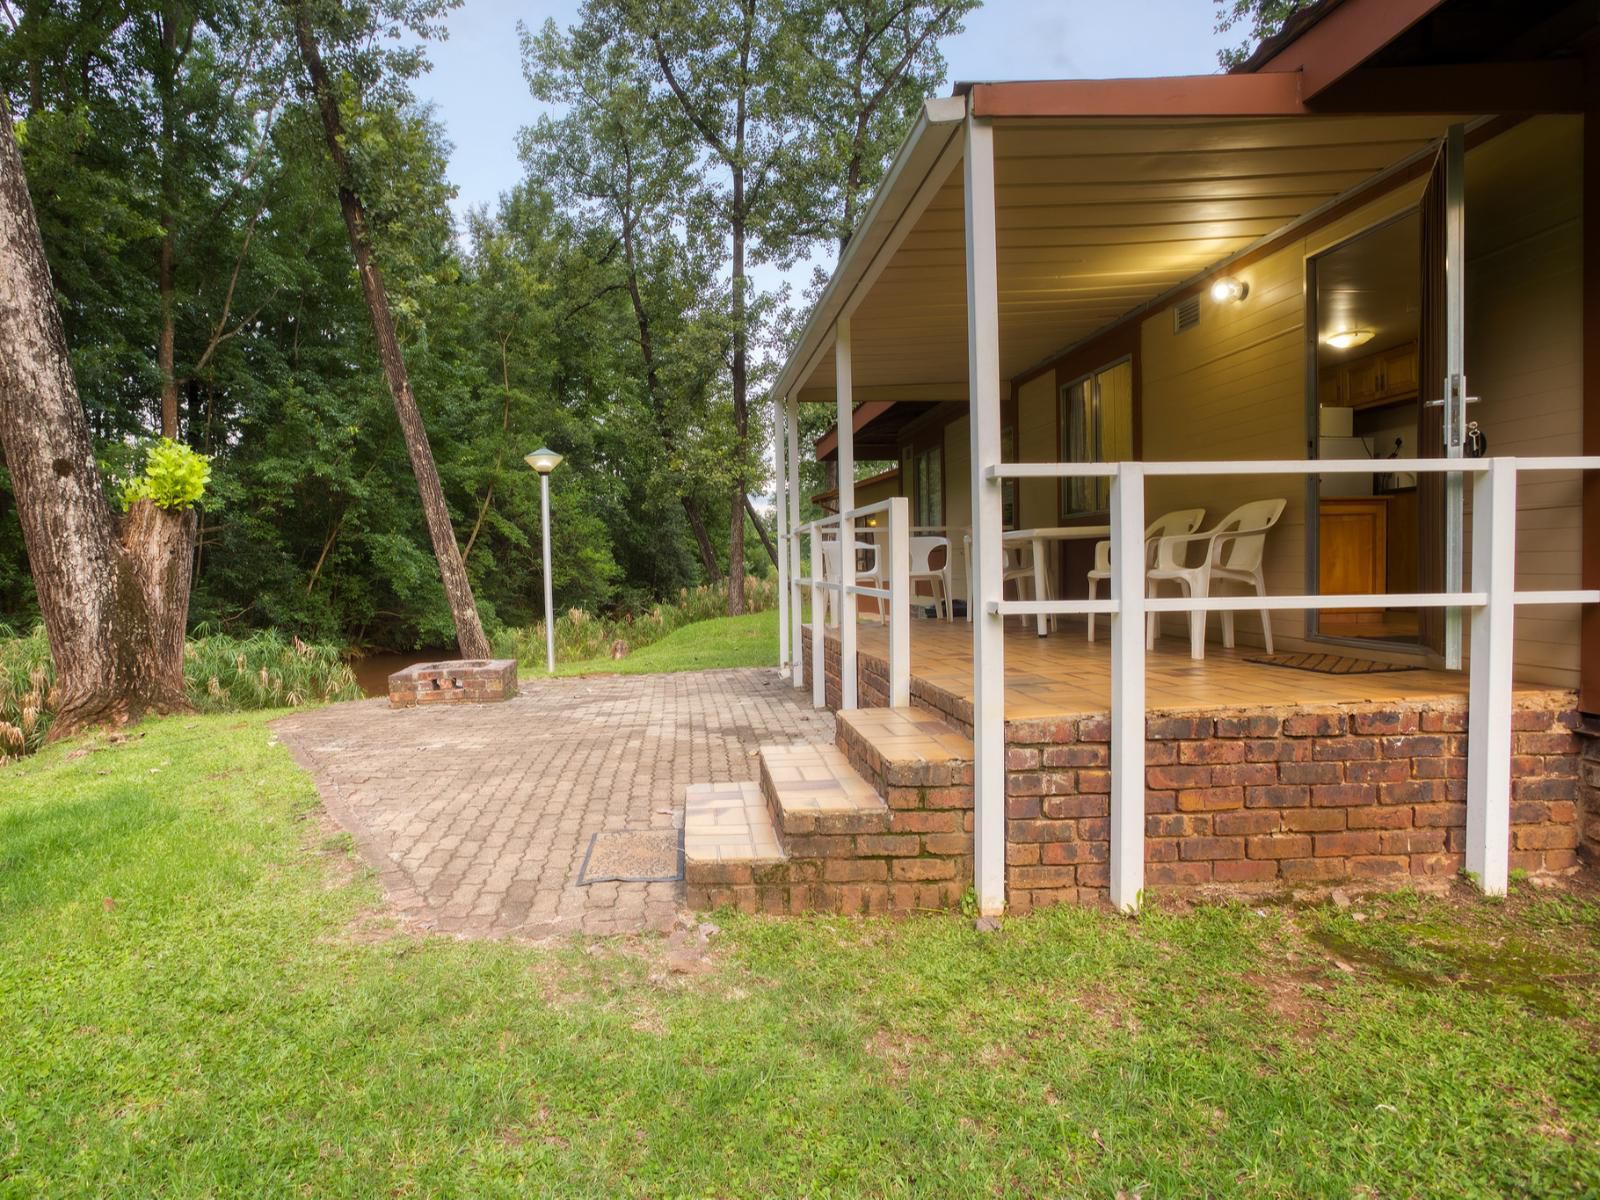 Merry Pebbles Resort Sabie Mpumalanga South Africa Cabin, Building, Architecture